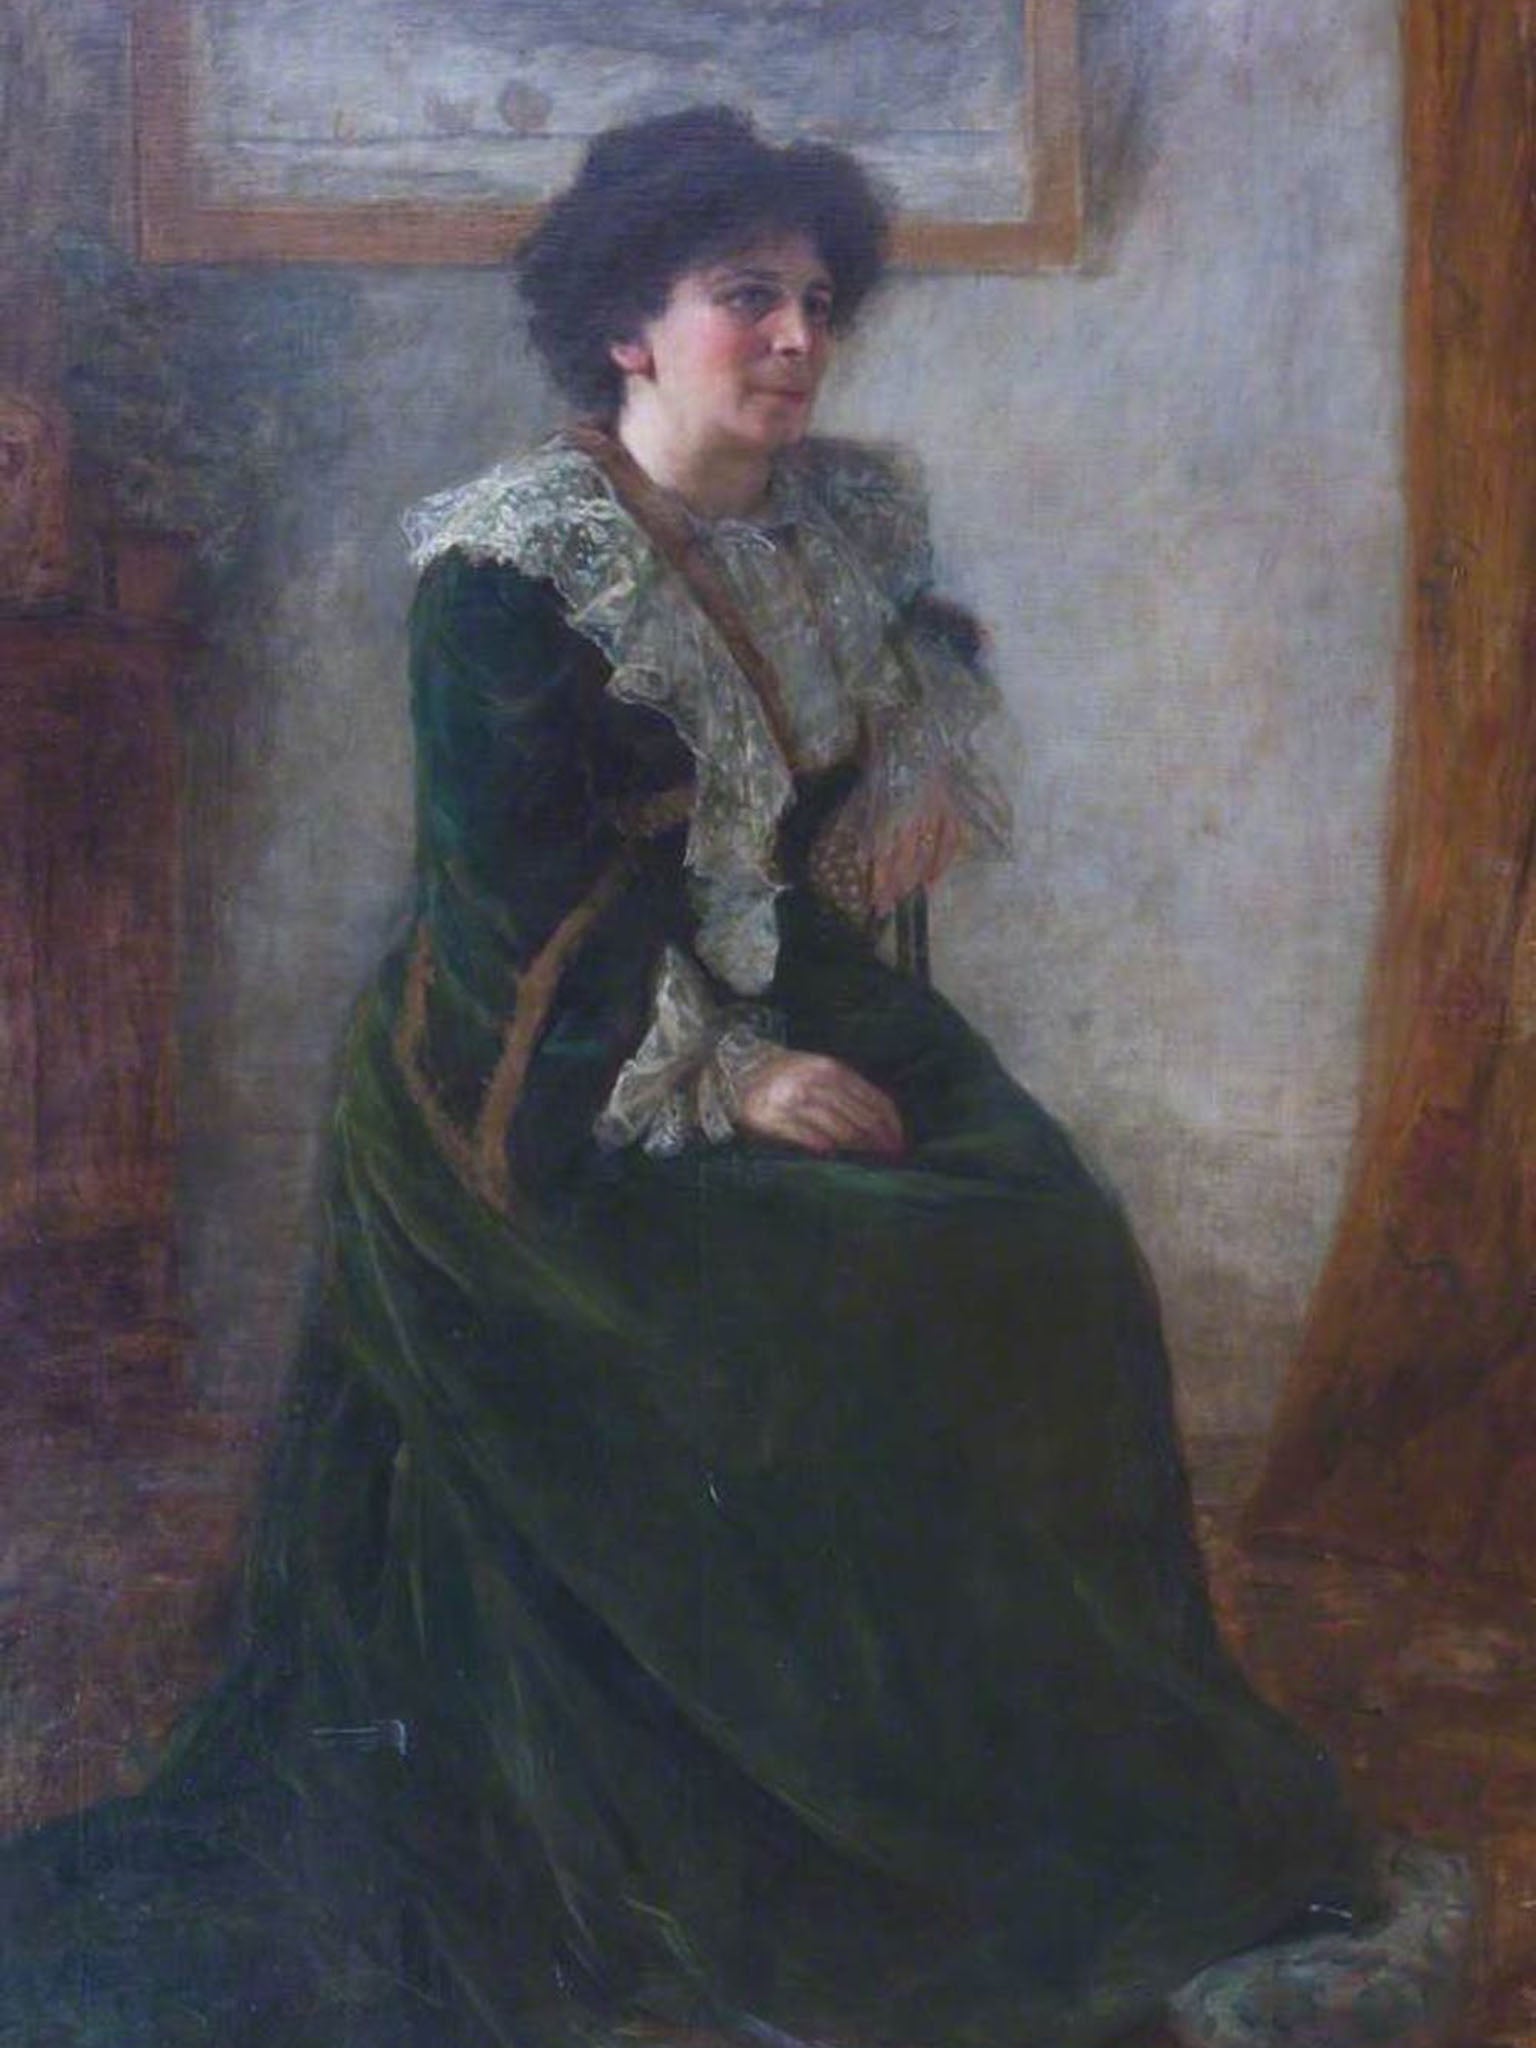 Hertha Ayrton was criticised for not supporting her husband